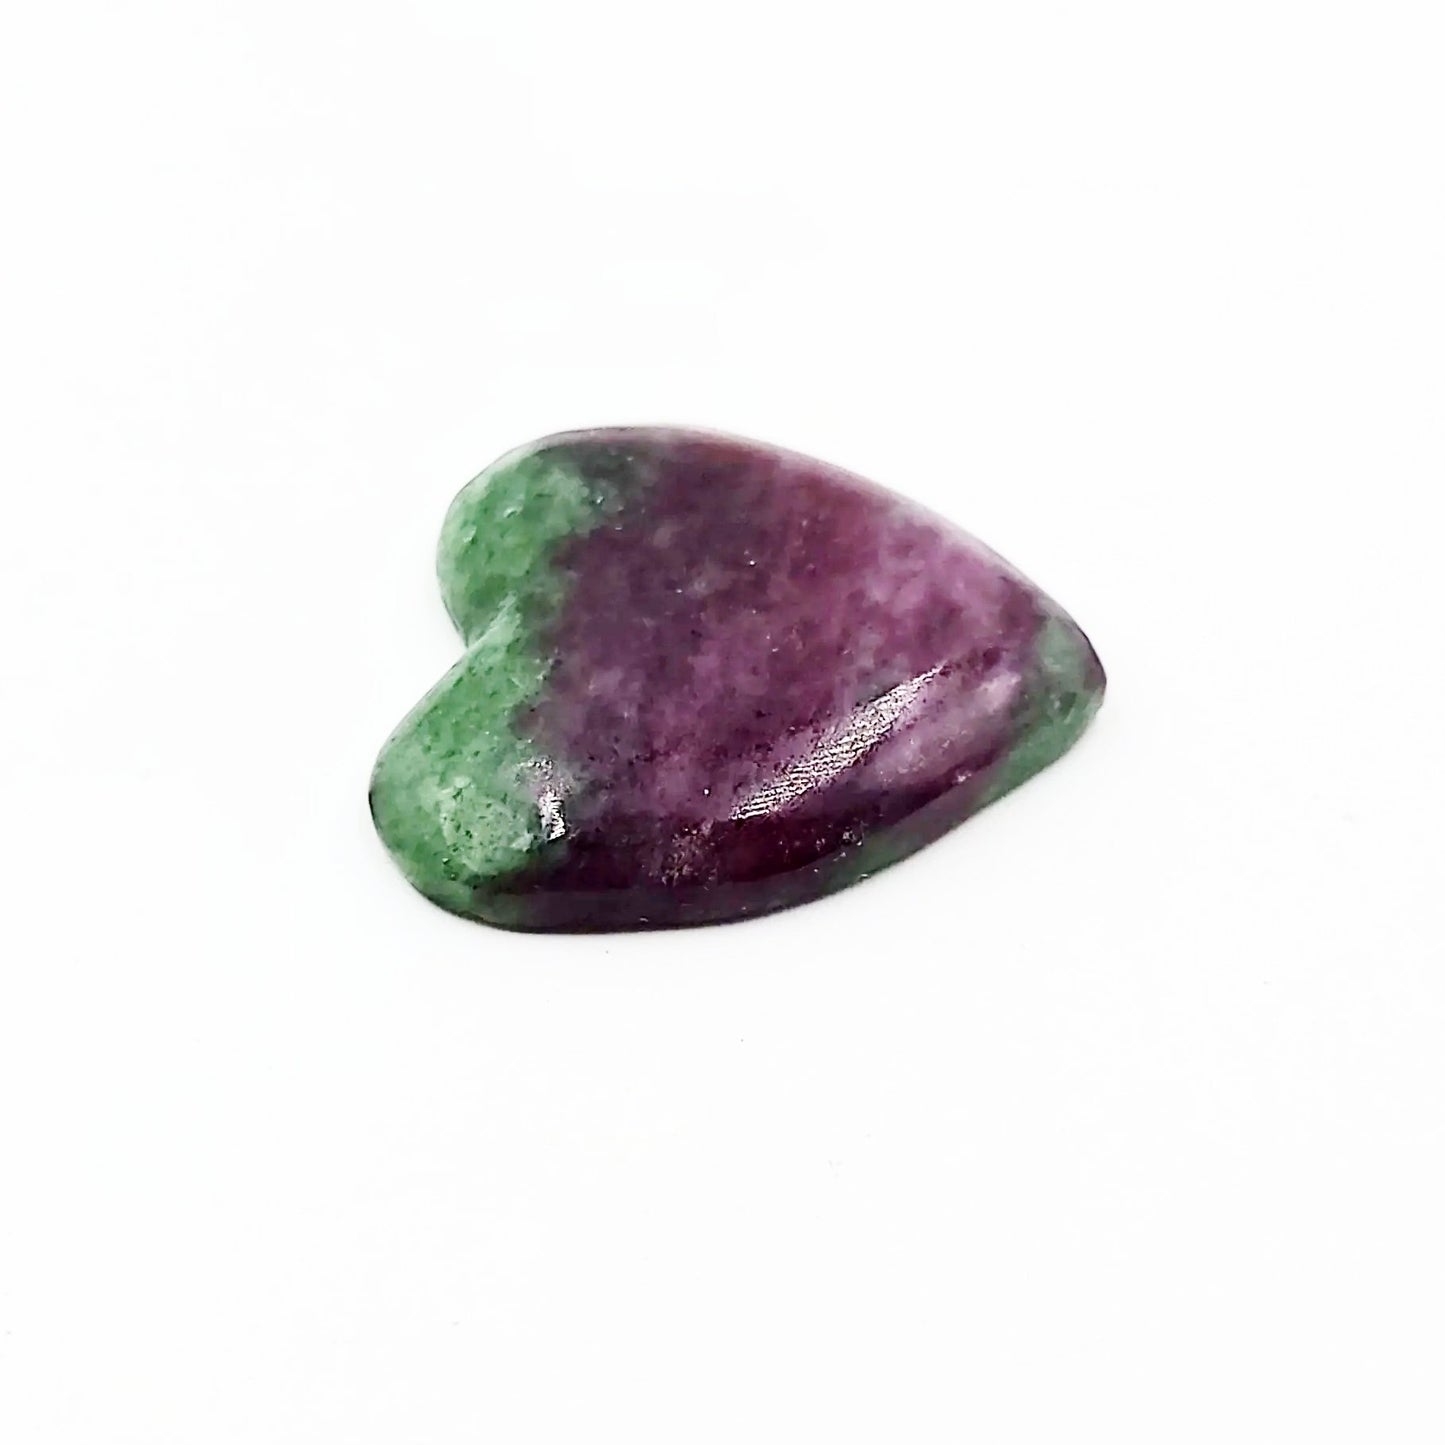 Ruby Zoisite Cabochon Heart Polished Cut Stone - Elevated Metaphysical